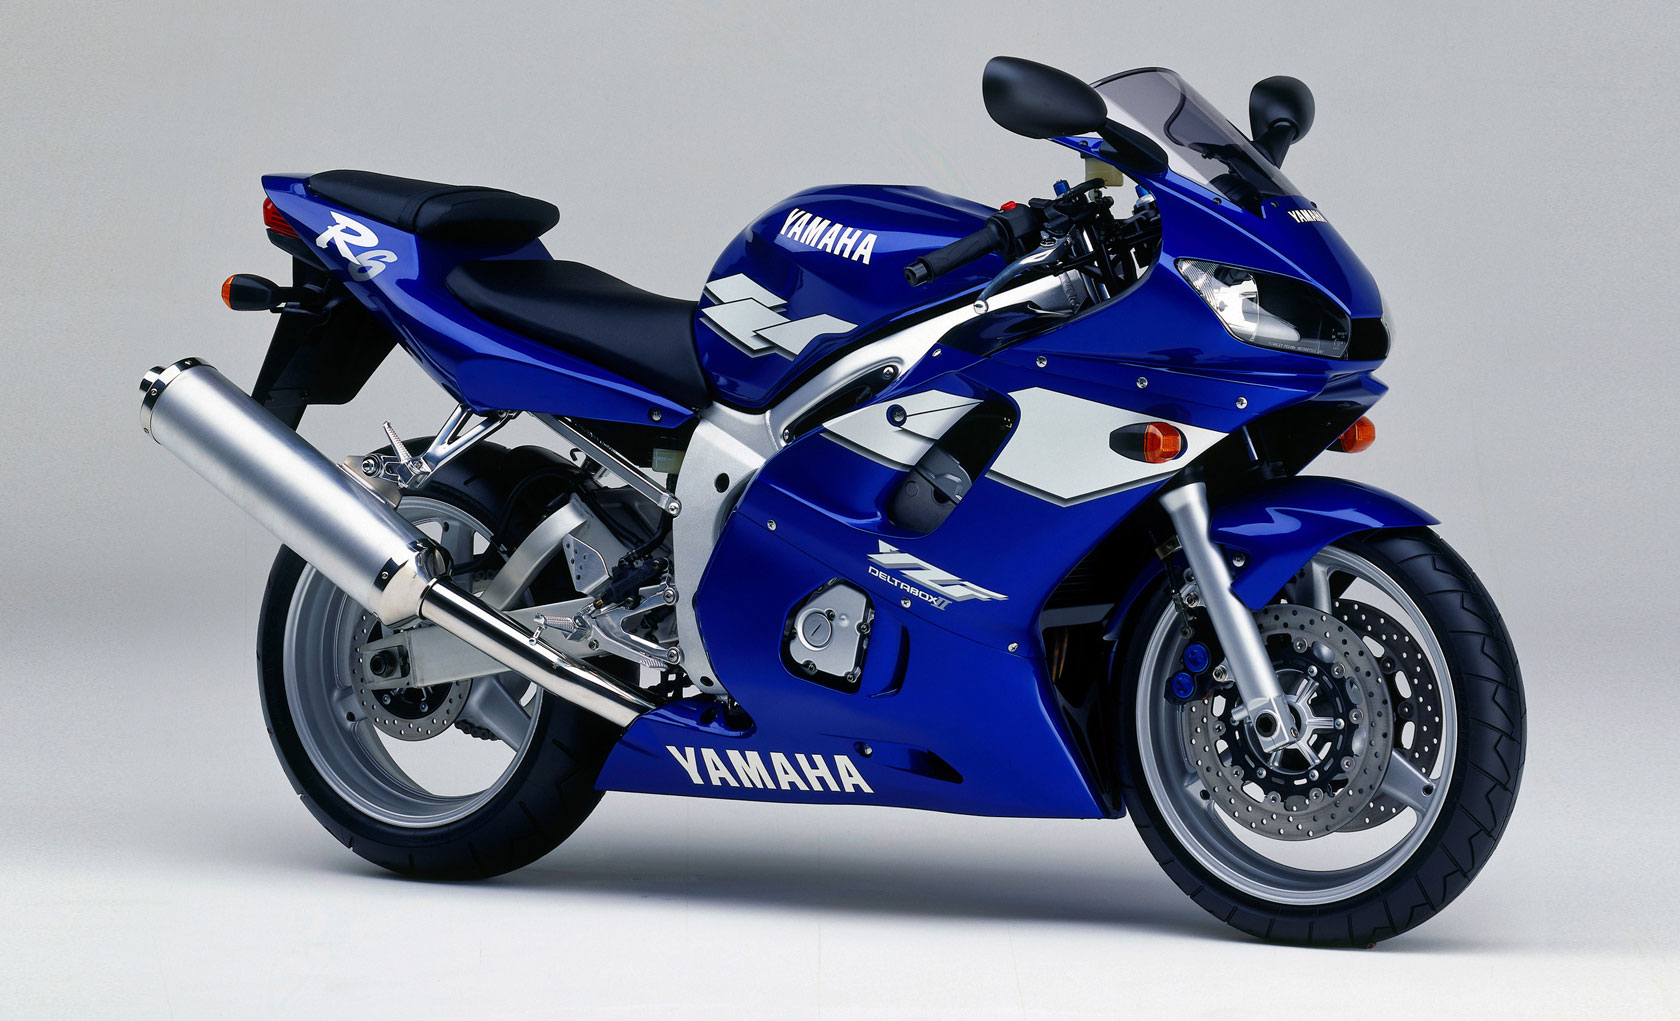 Page 1 - Yamaha R6/YZF-R6 series model history timelines